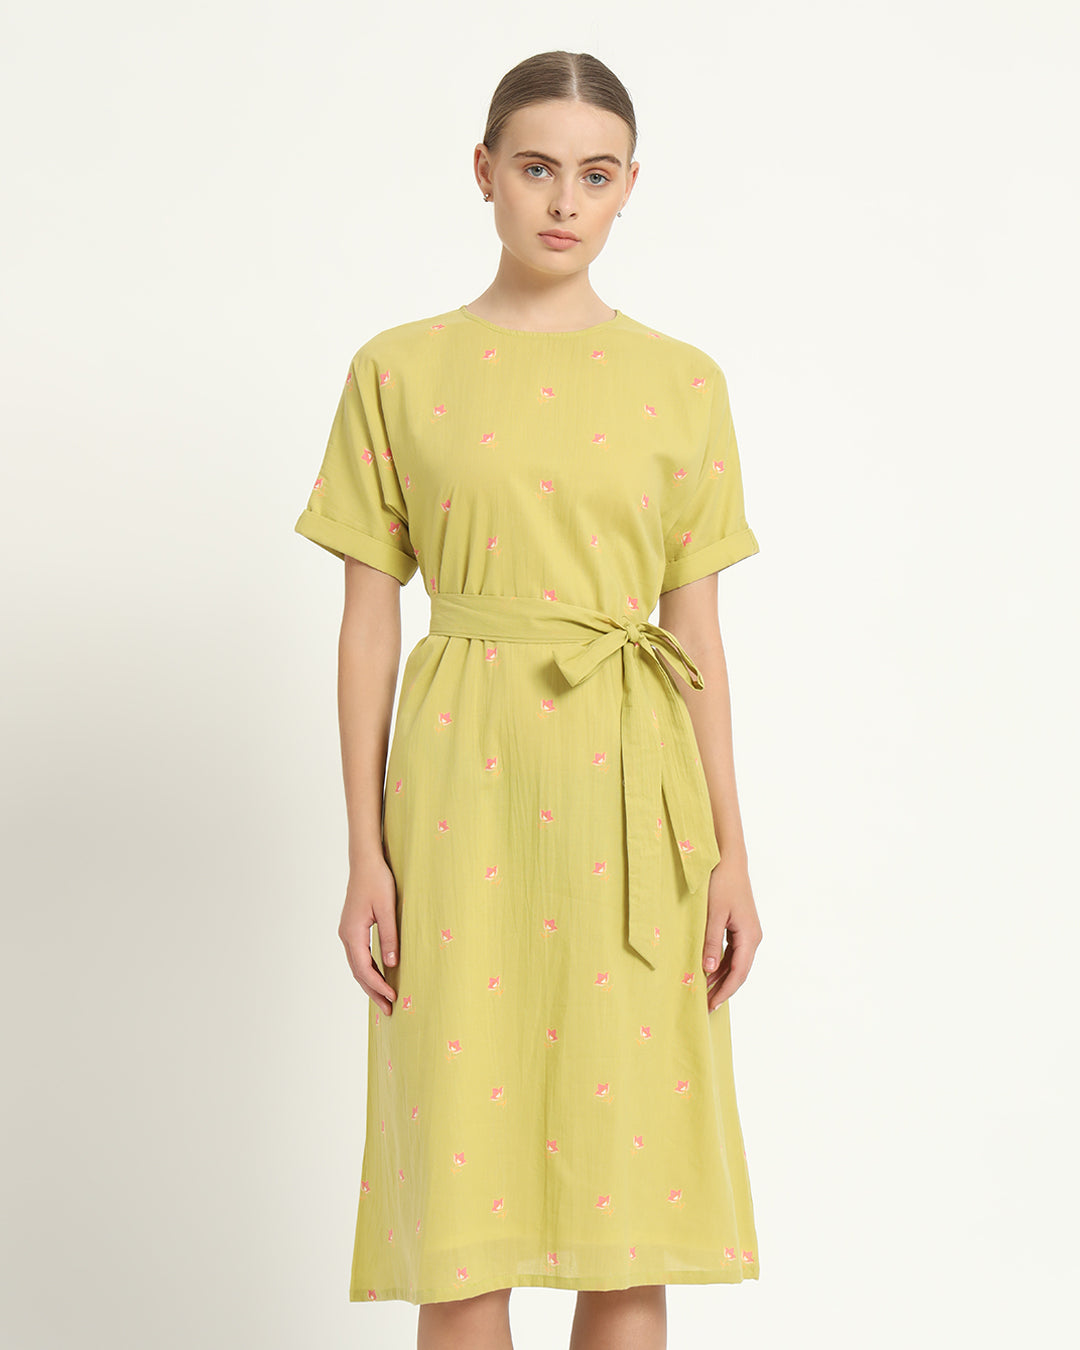 The Tayma Lime Cosmos Cotton Dress